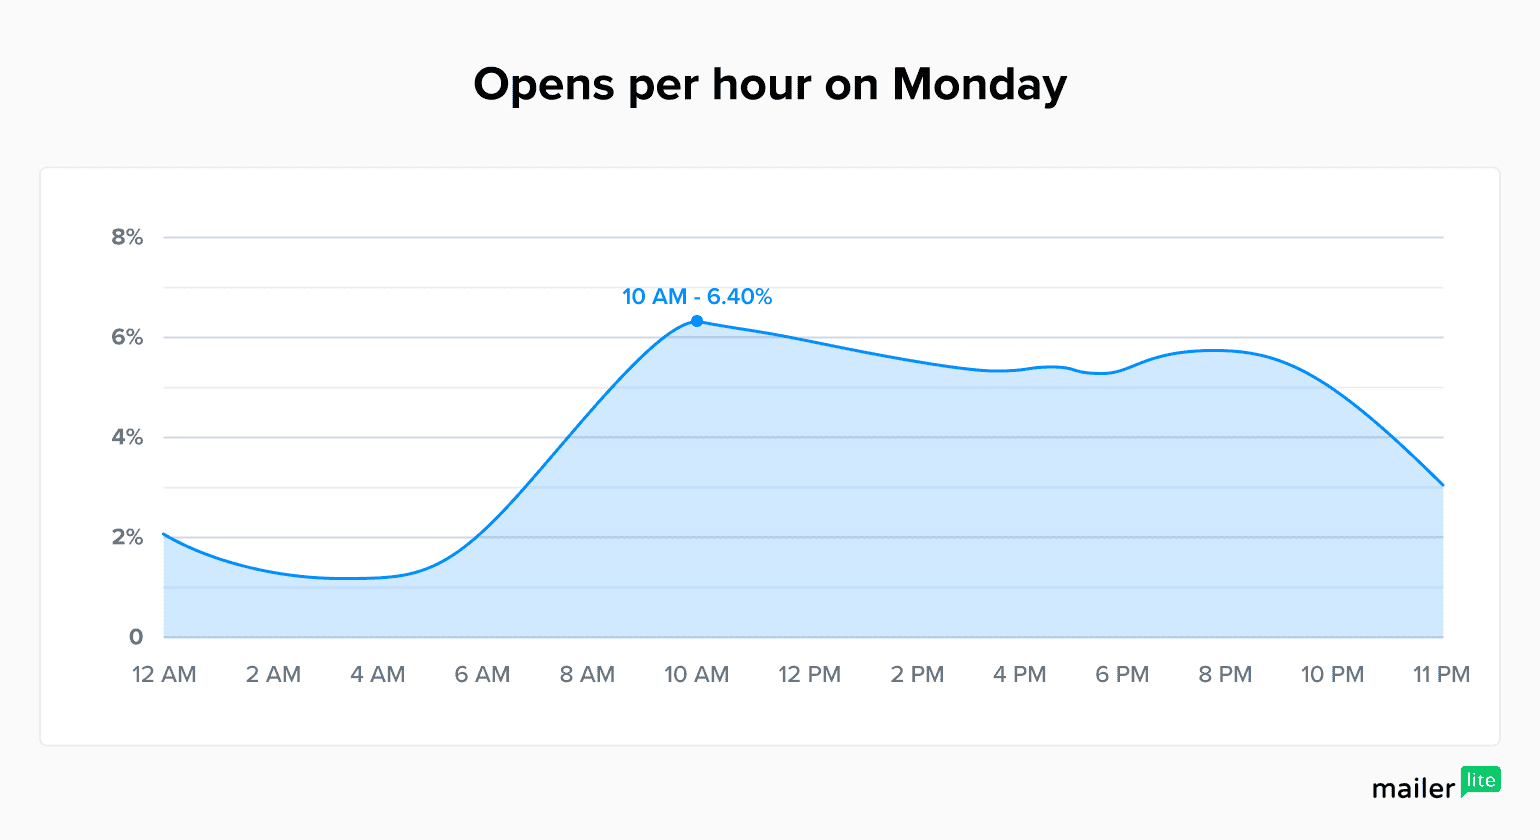 MailerLite's graph showing opens per hour on Mondays